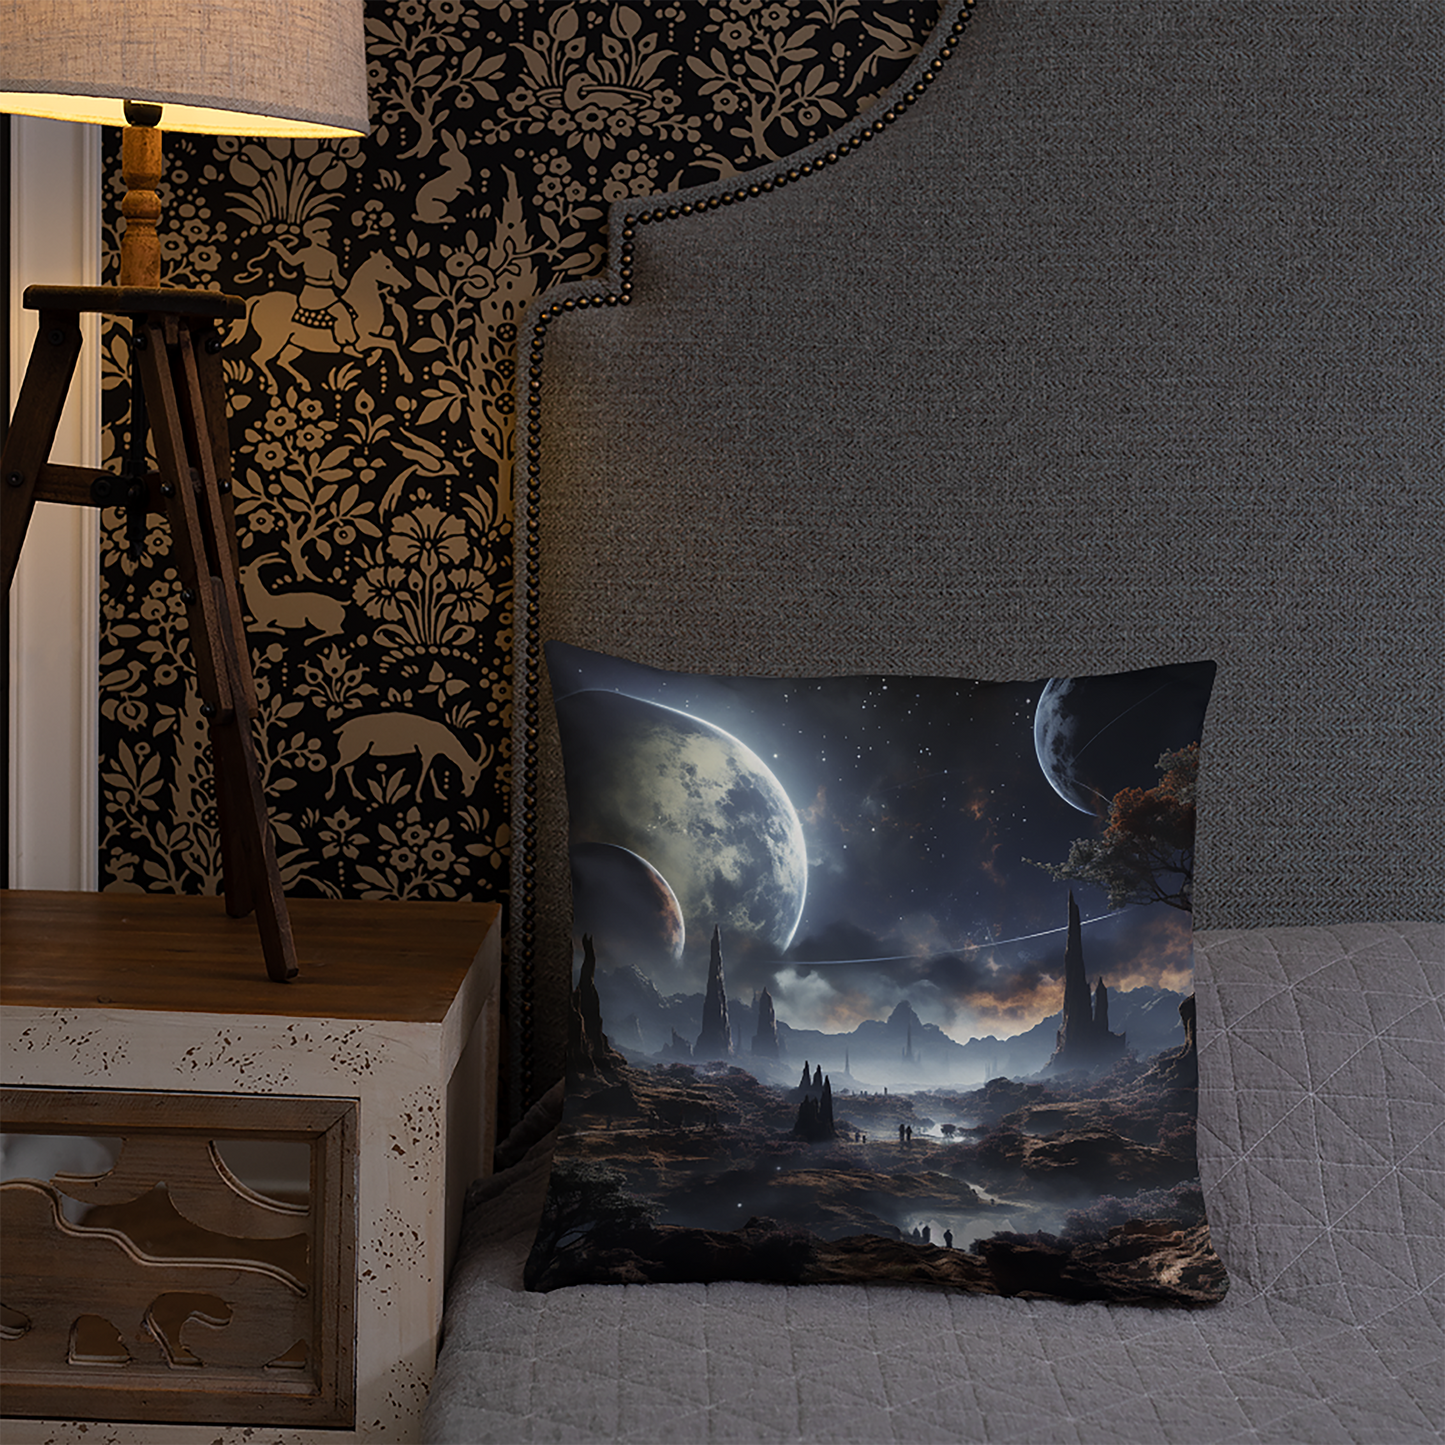 Space Throw Pillow Cosmic Alien Planet Landscape Polyester Decorative Cushion 18x18